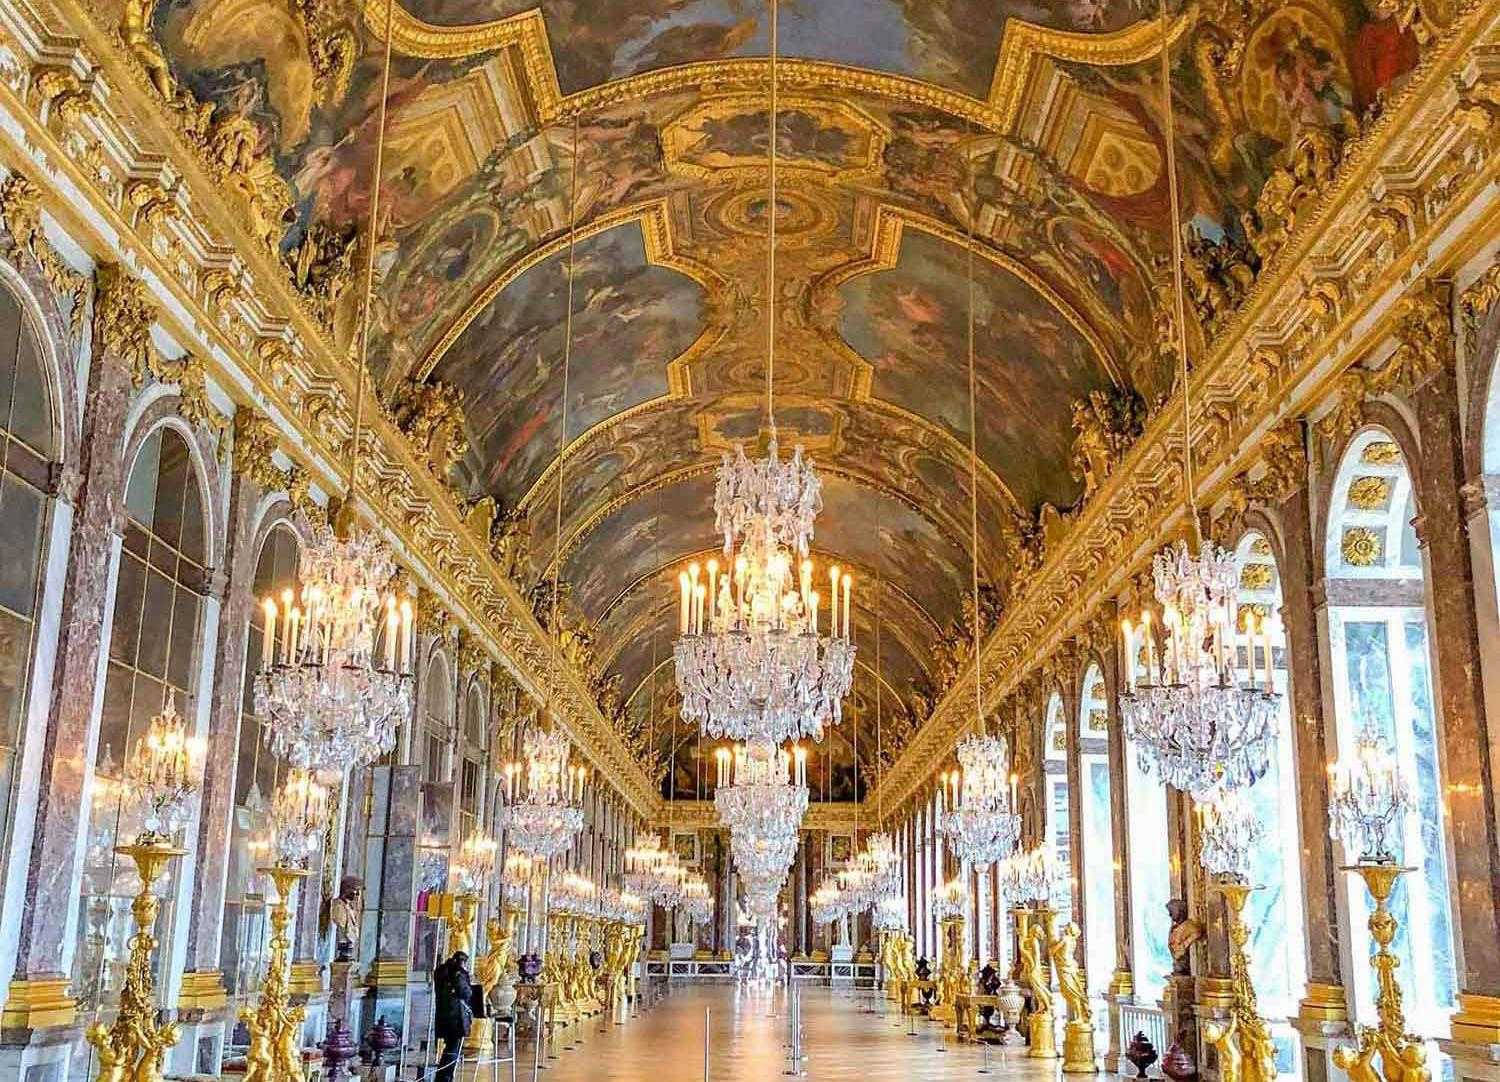 Inside The Hall Of Mirrors In The Palace Of Versailles